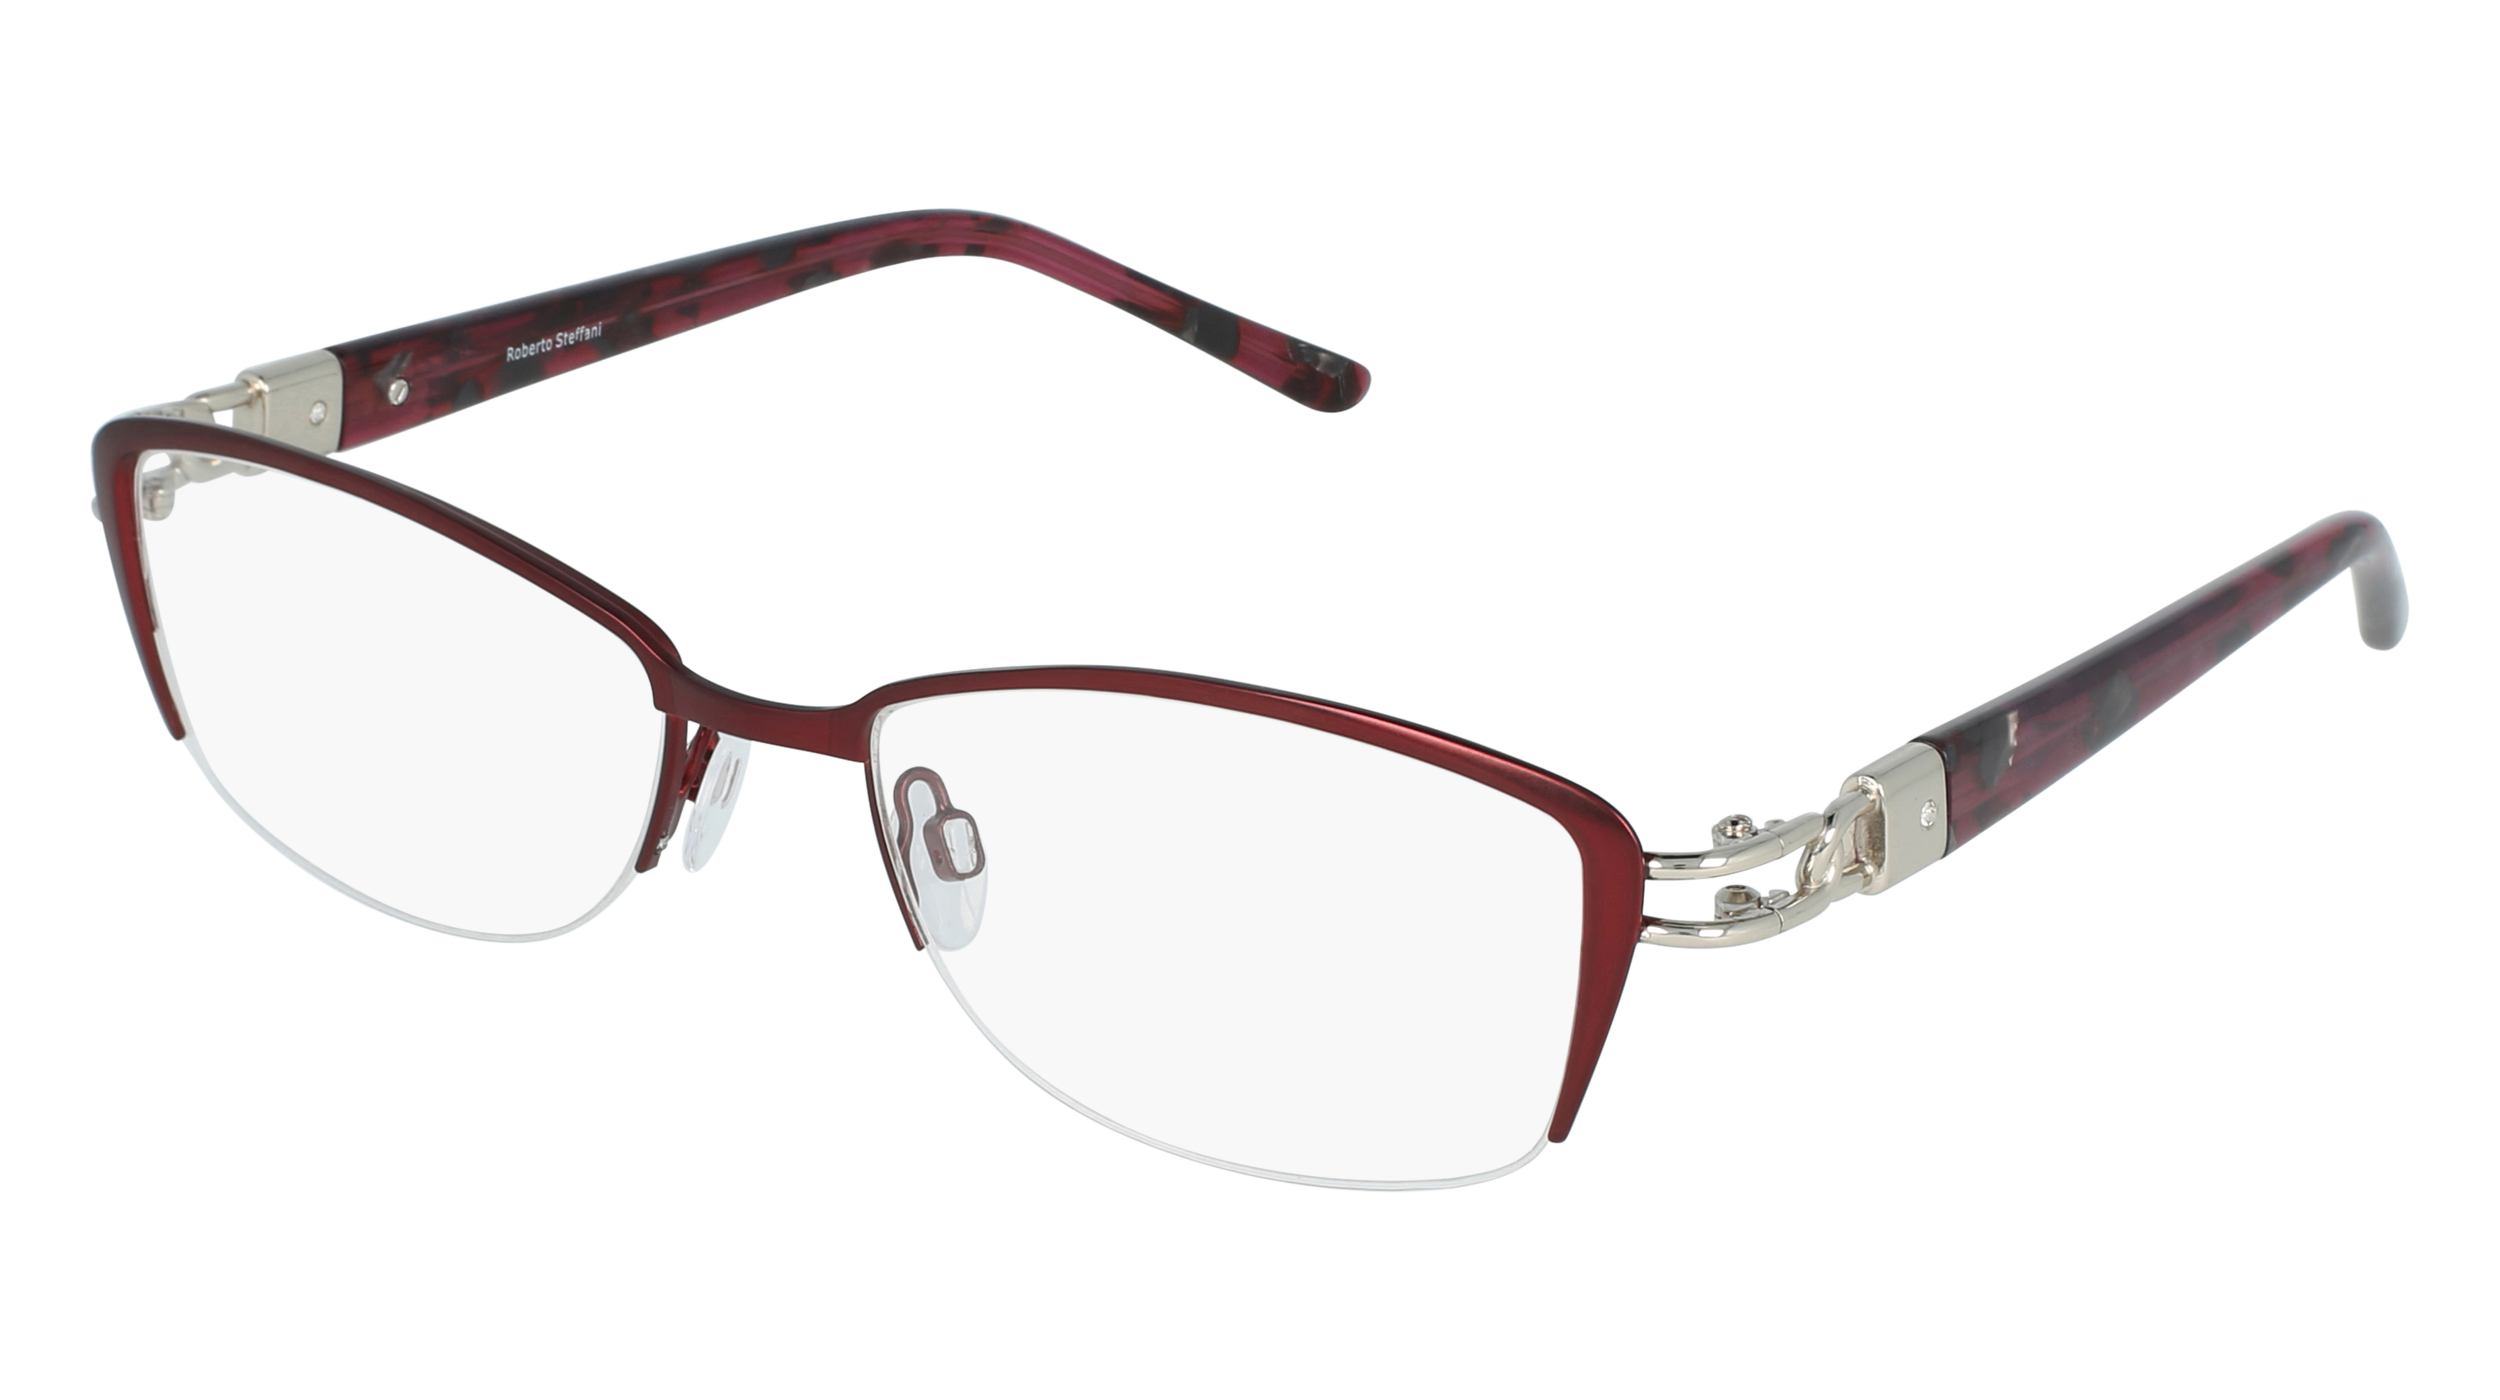 R RS 159 women's eyeglasses (from the side)